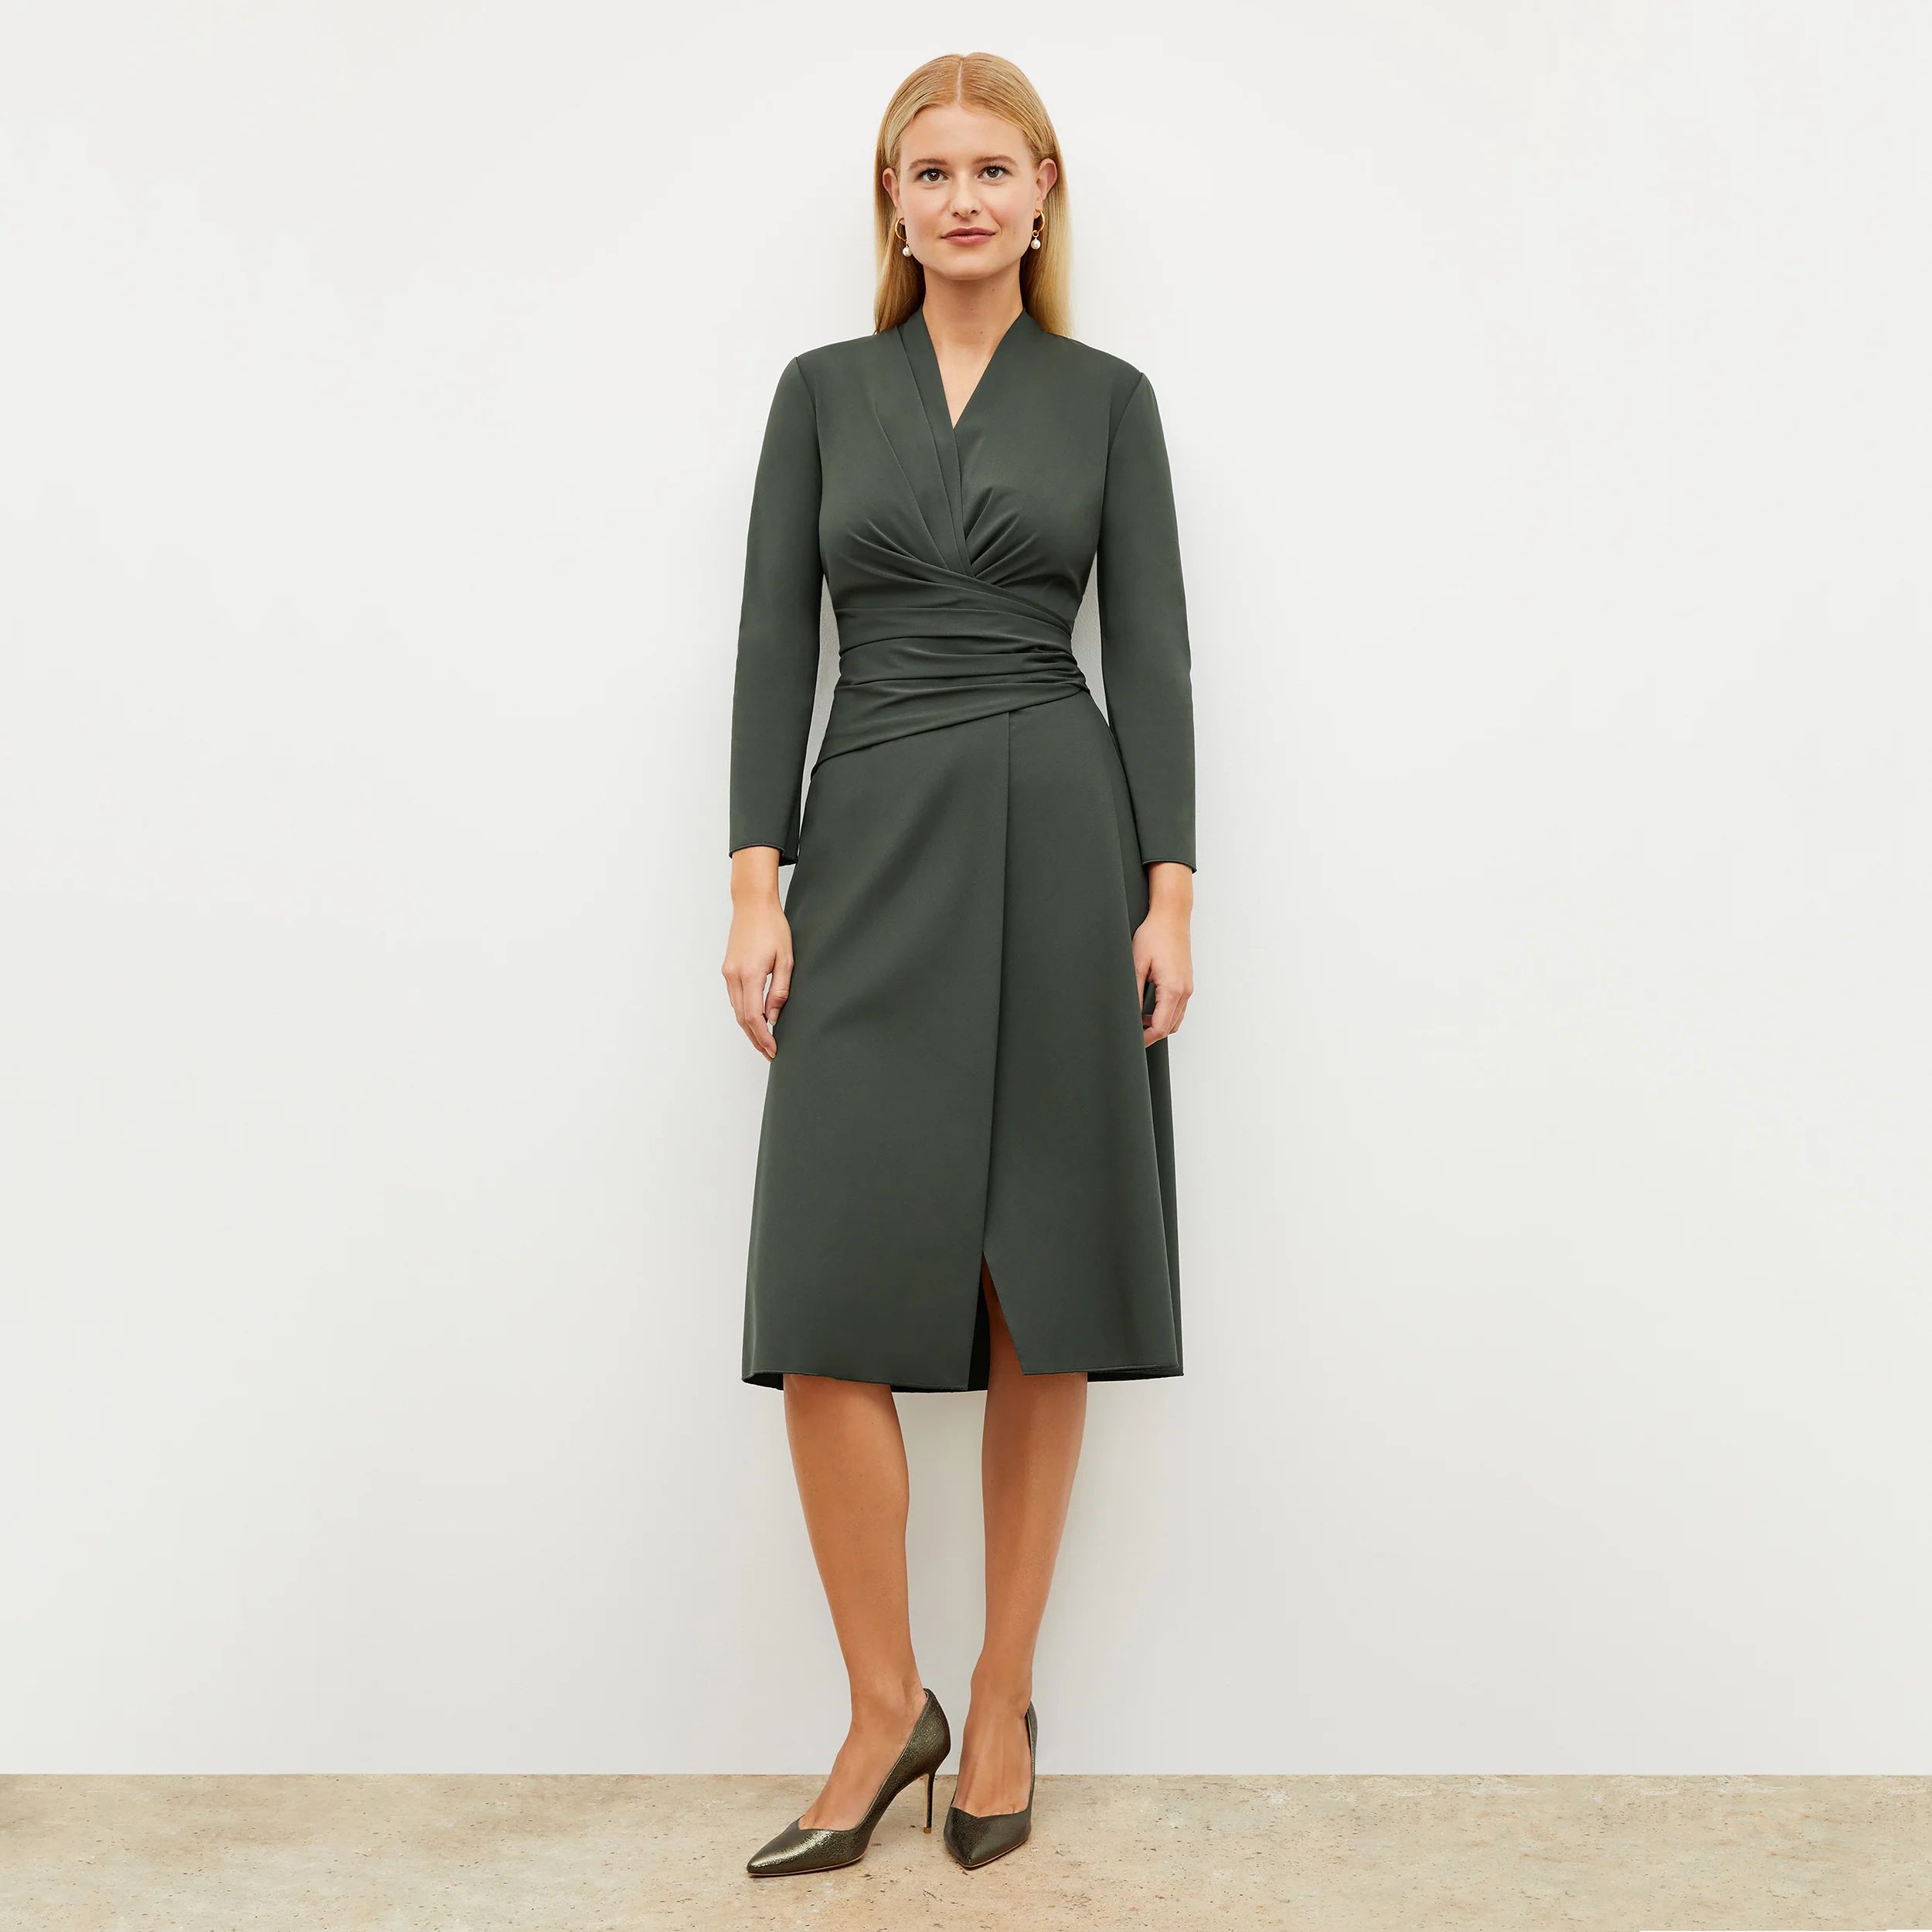 The Carly Dress - Stretch Crepe | MM LaFleur